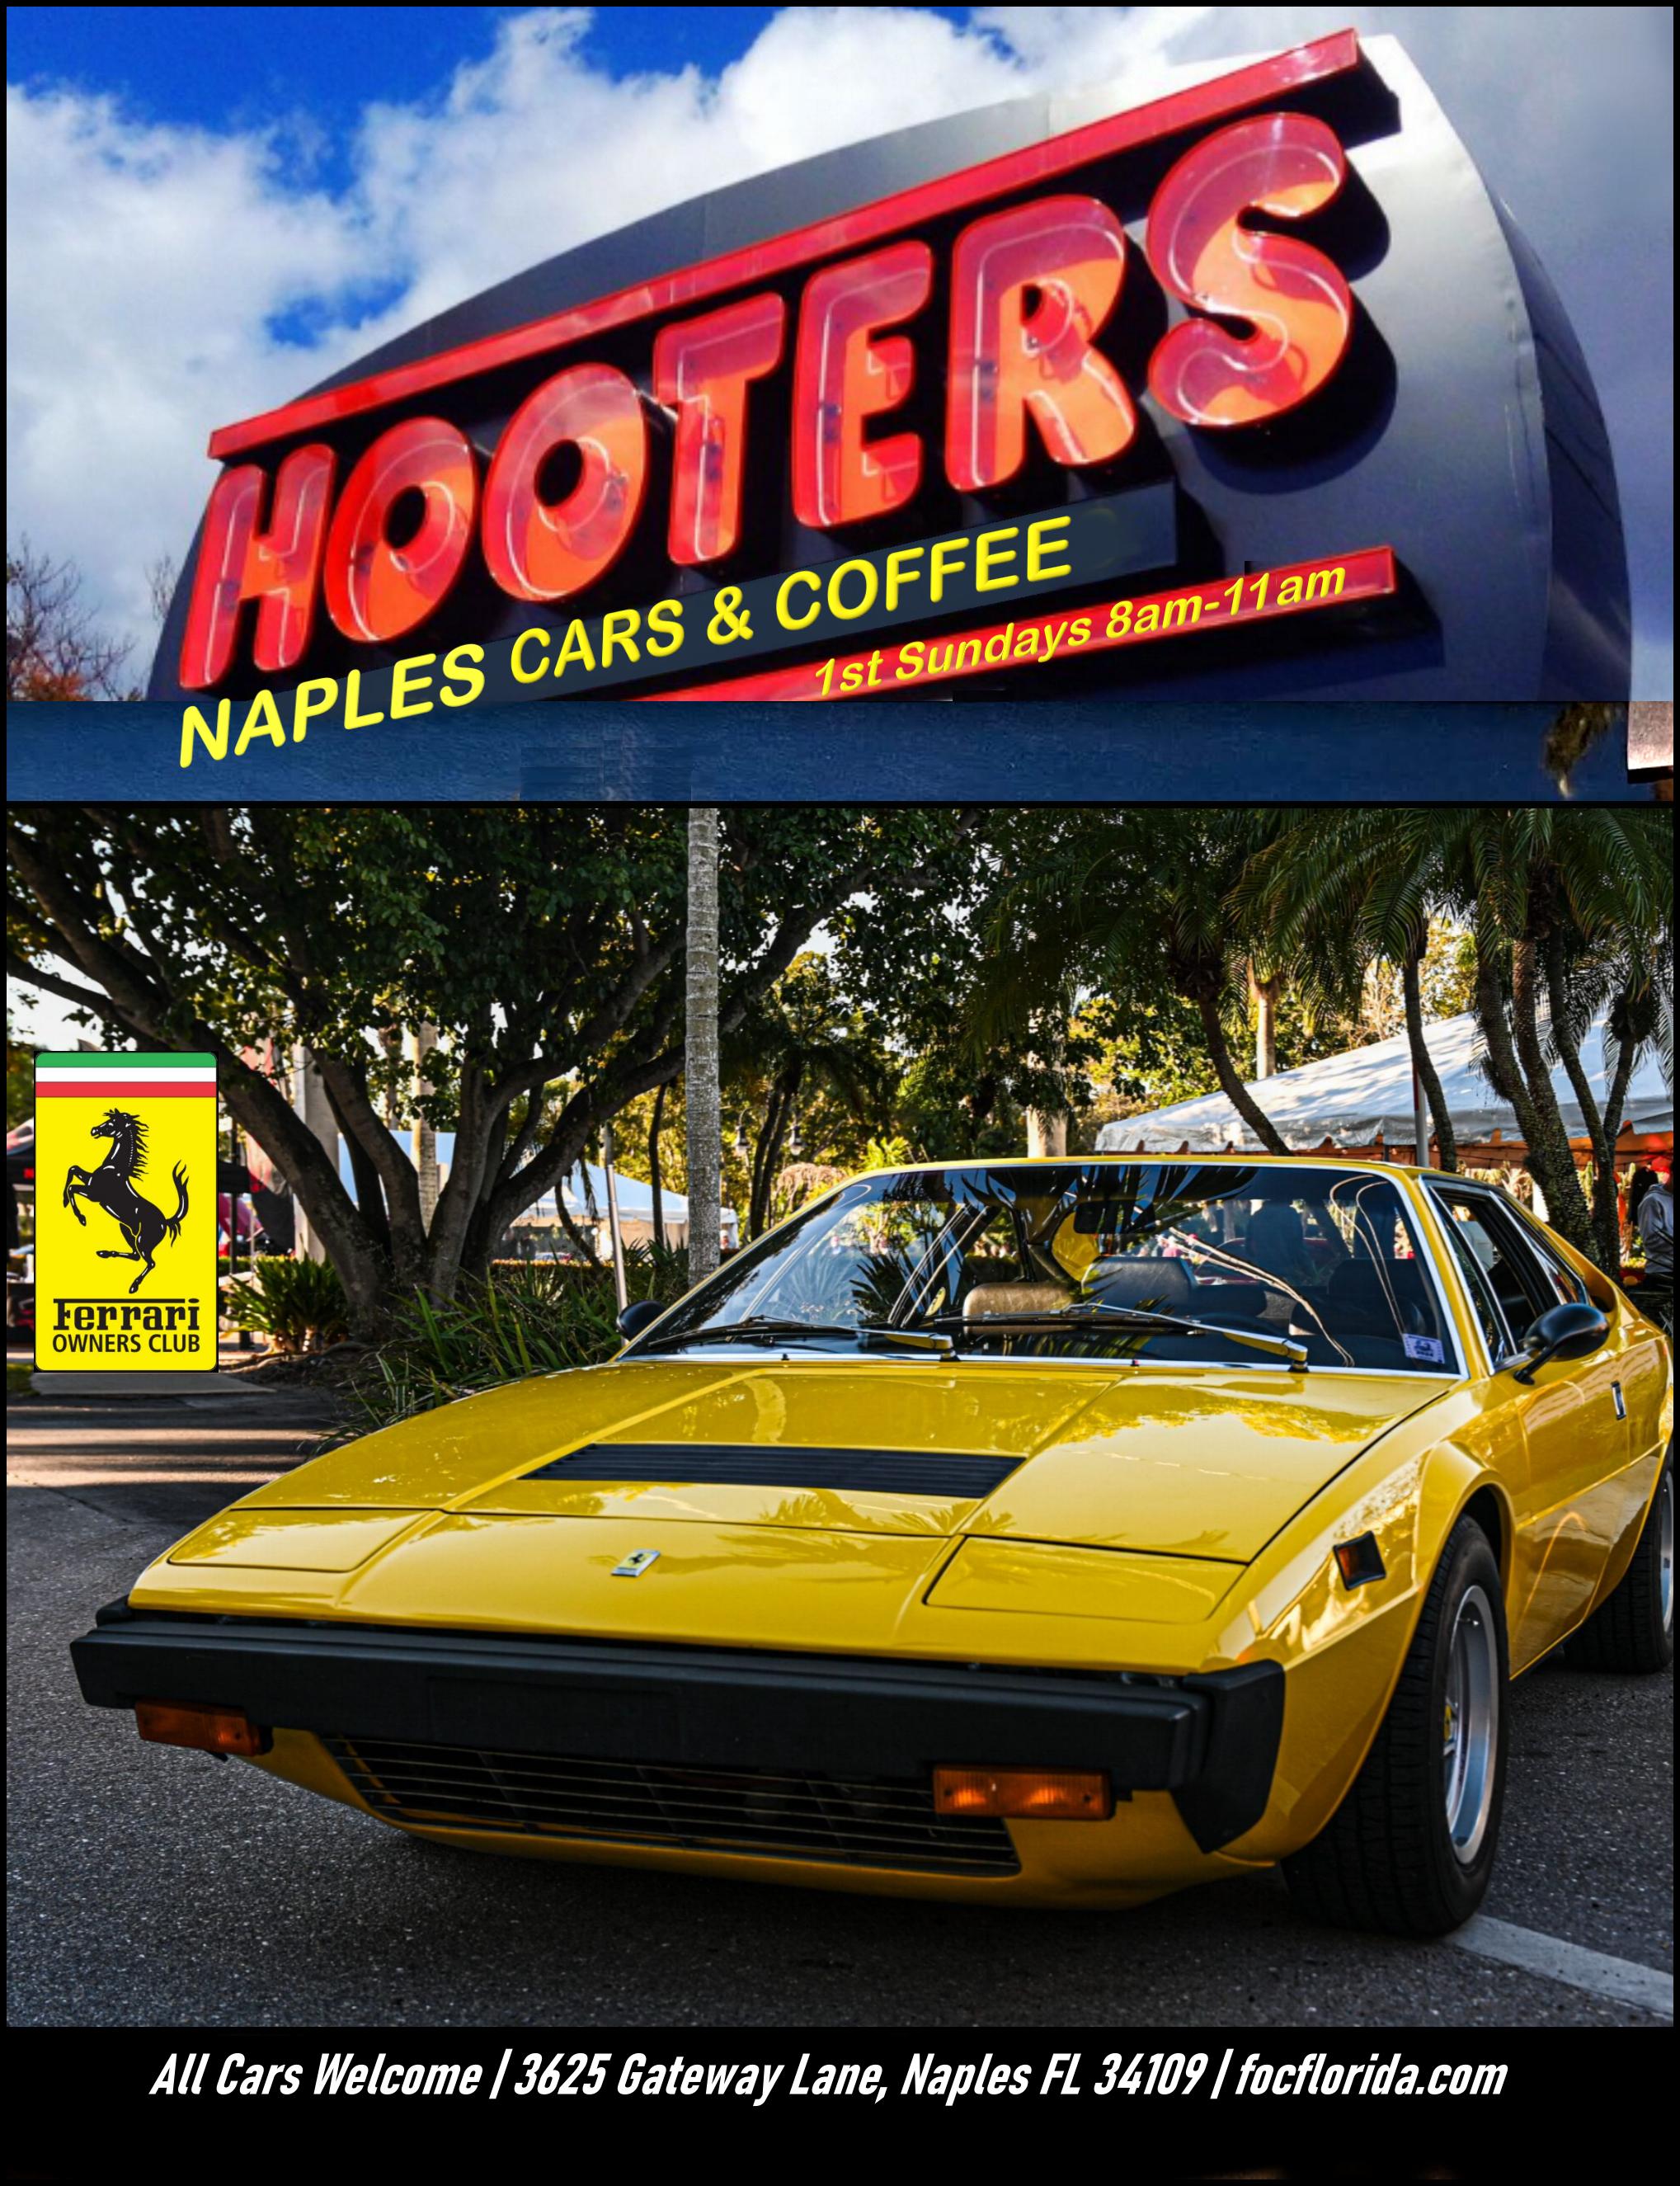 Hooters Cars and Coffee